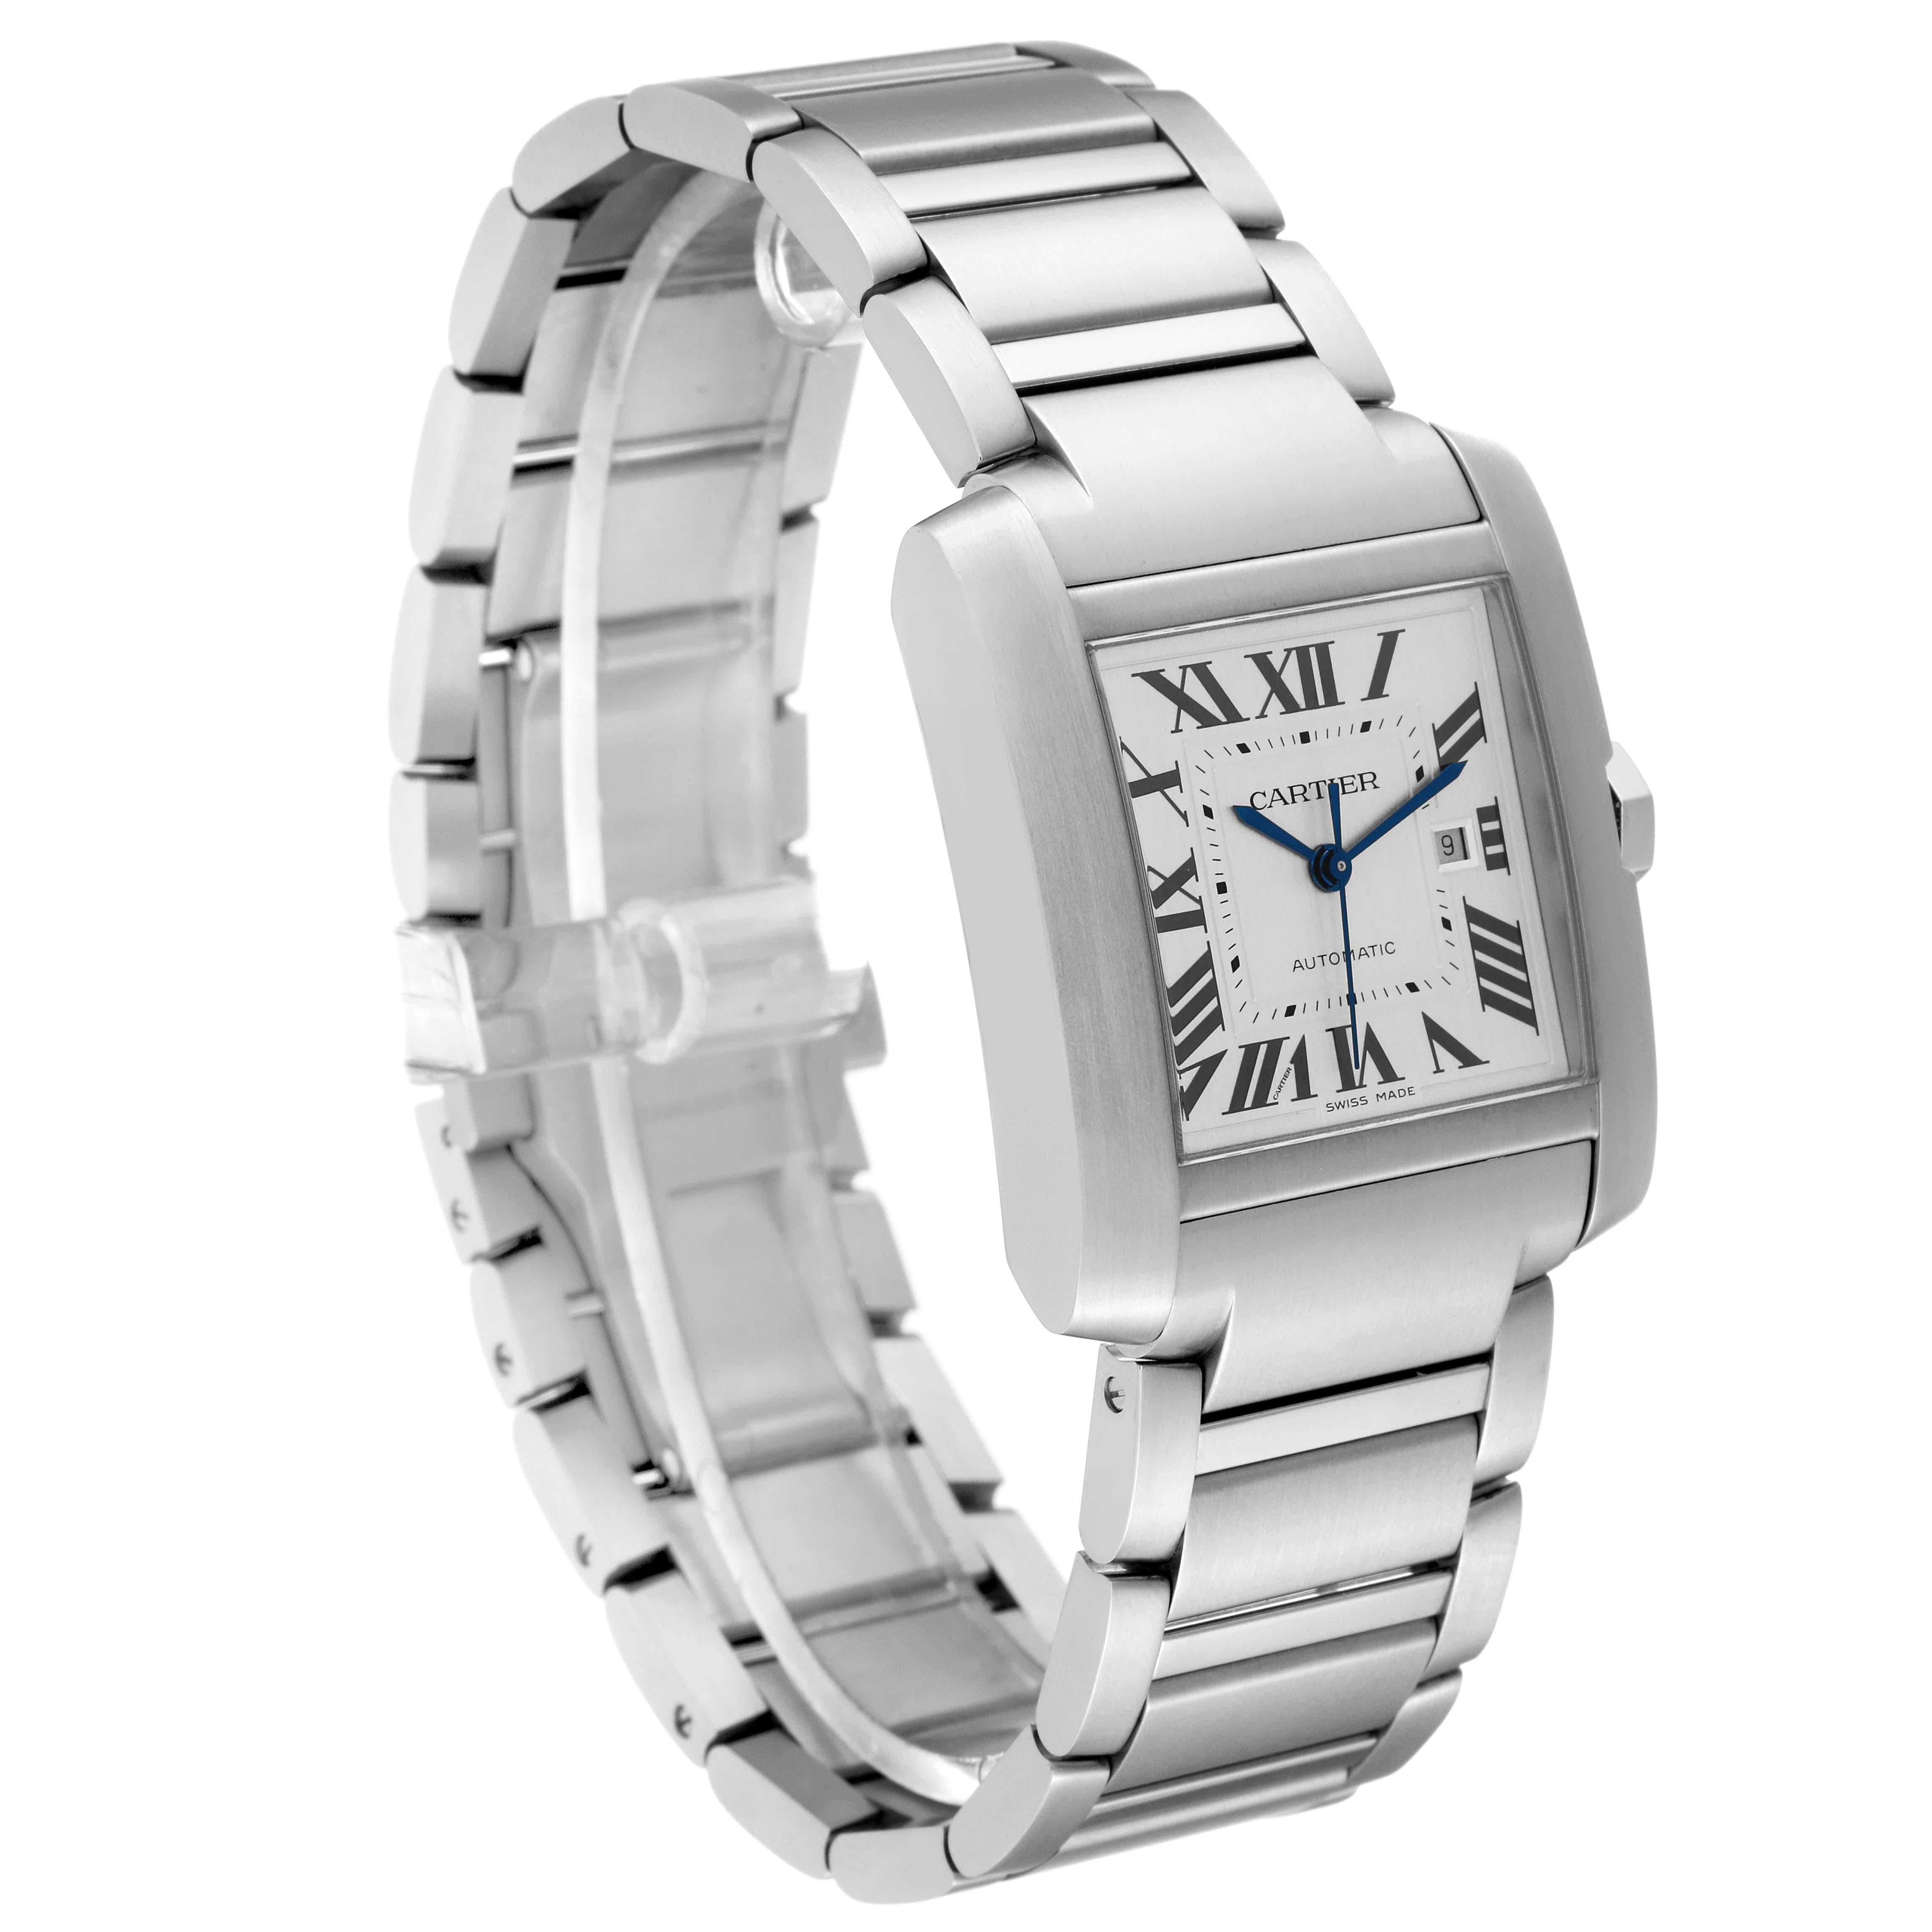 Cartier Tank Francaise Large Automatic Steel Mens Watch WSTA0067 In Excellent Condition For Sale In Atlanta, GA